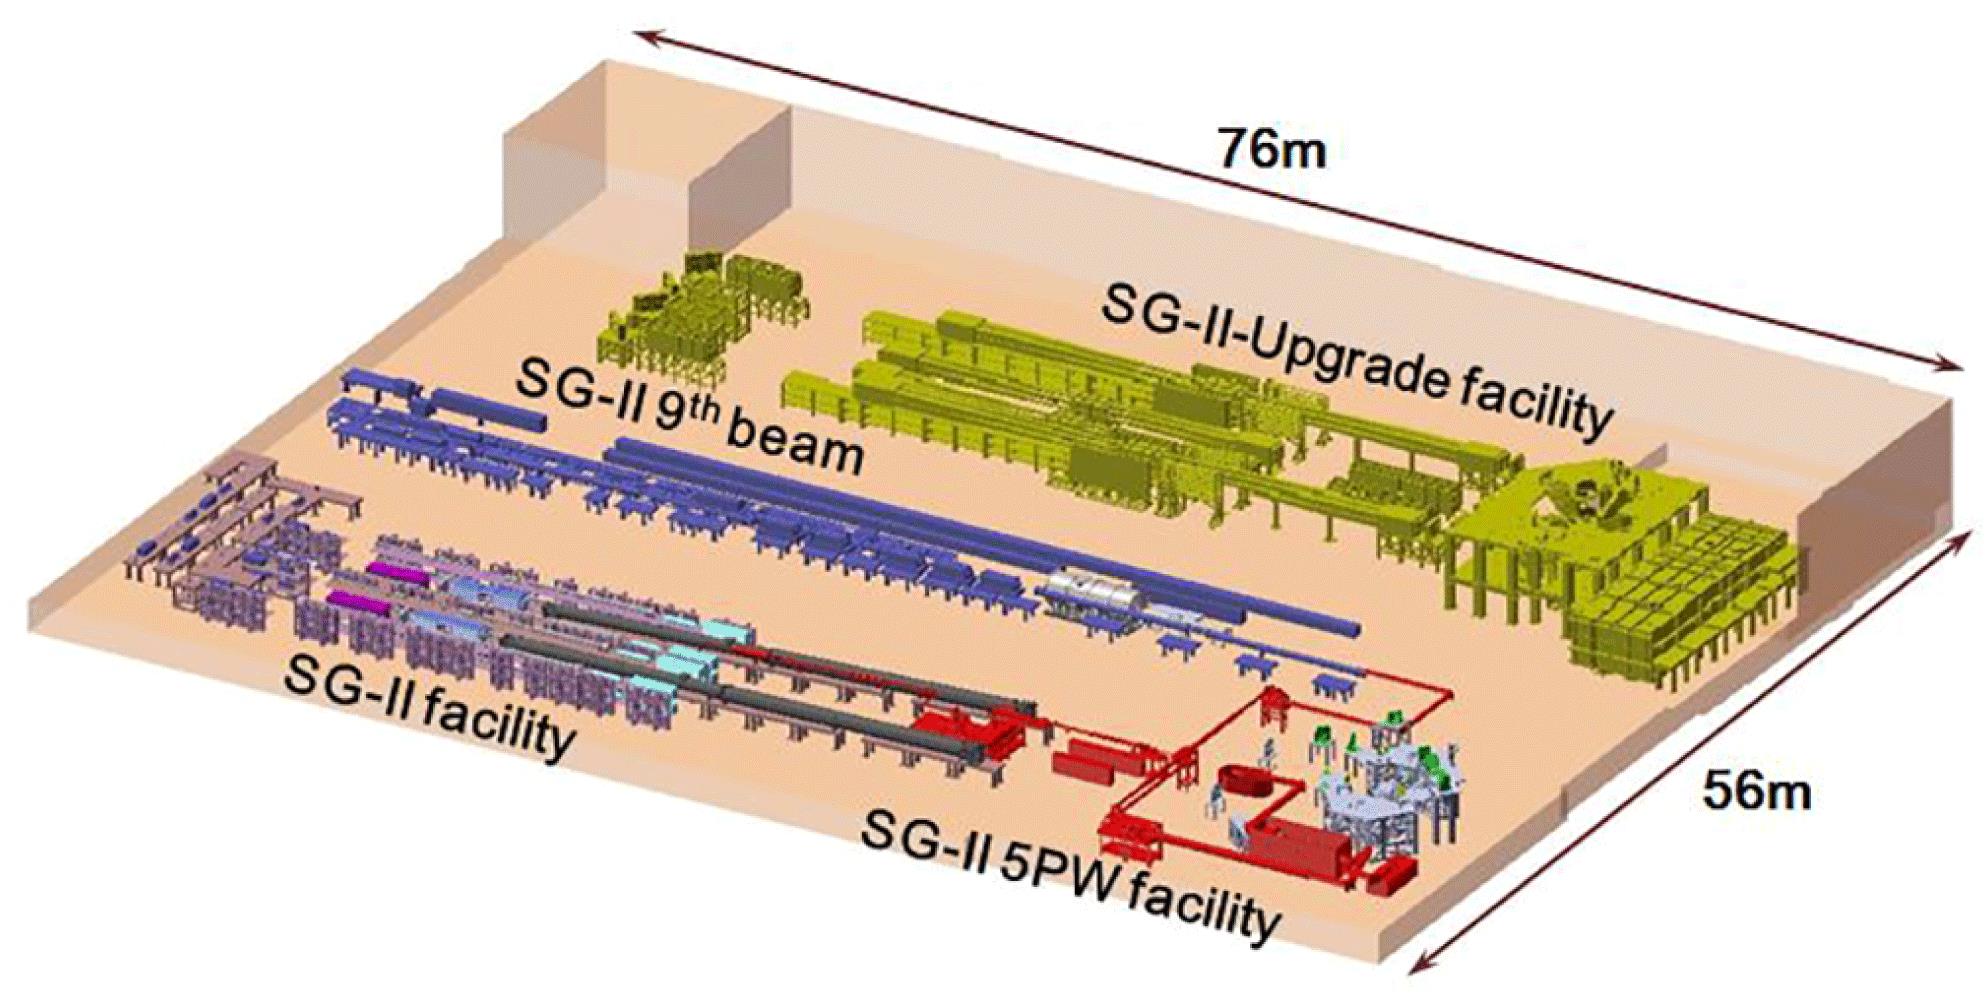 Layout of the SG series laser facilities.